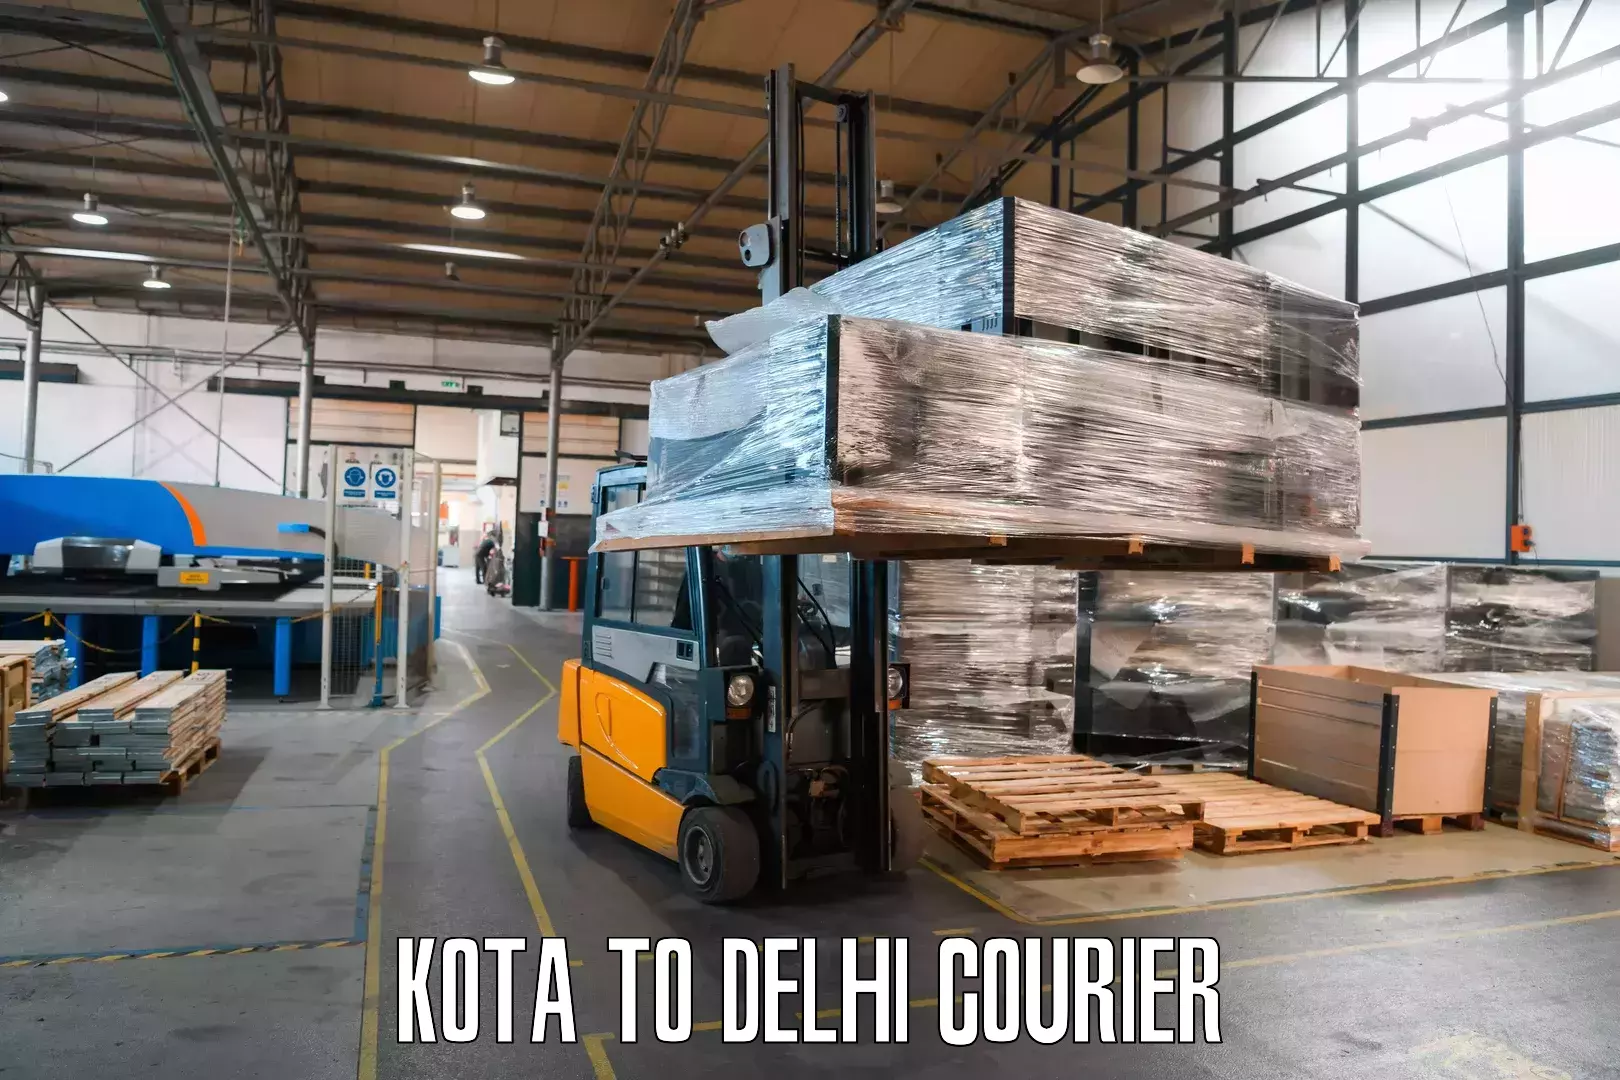 Reliable delivery network Kota to NCR